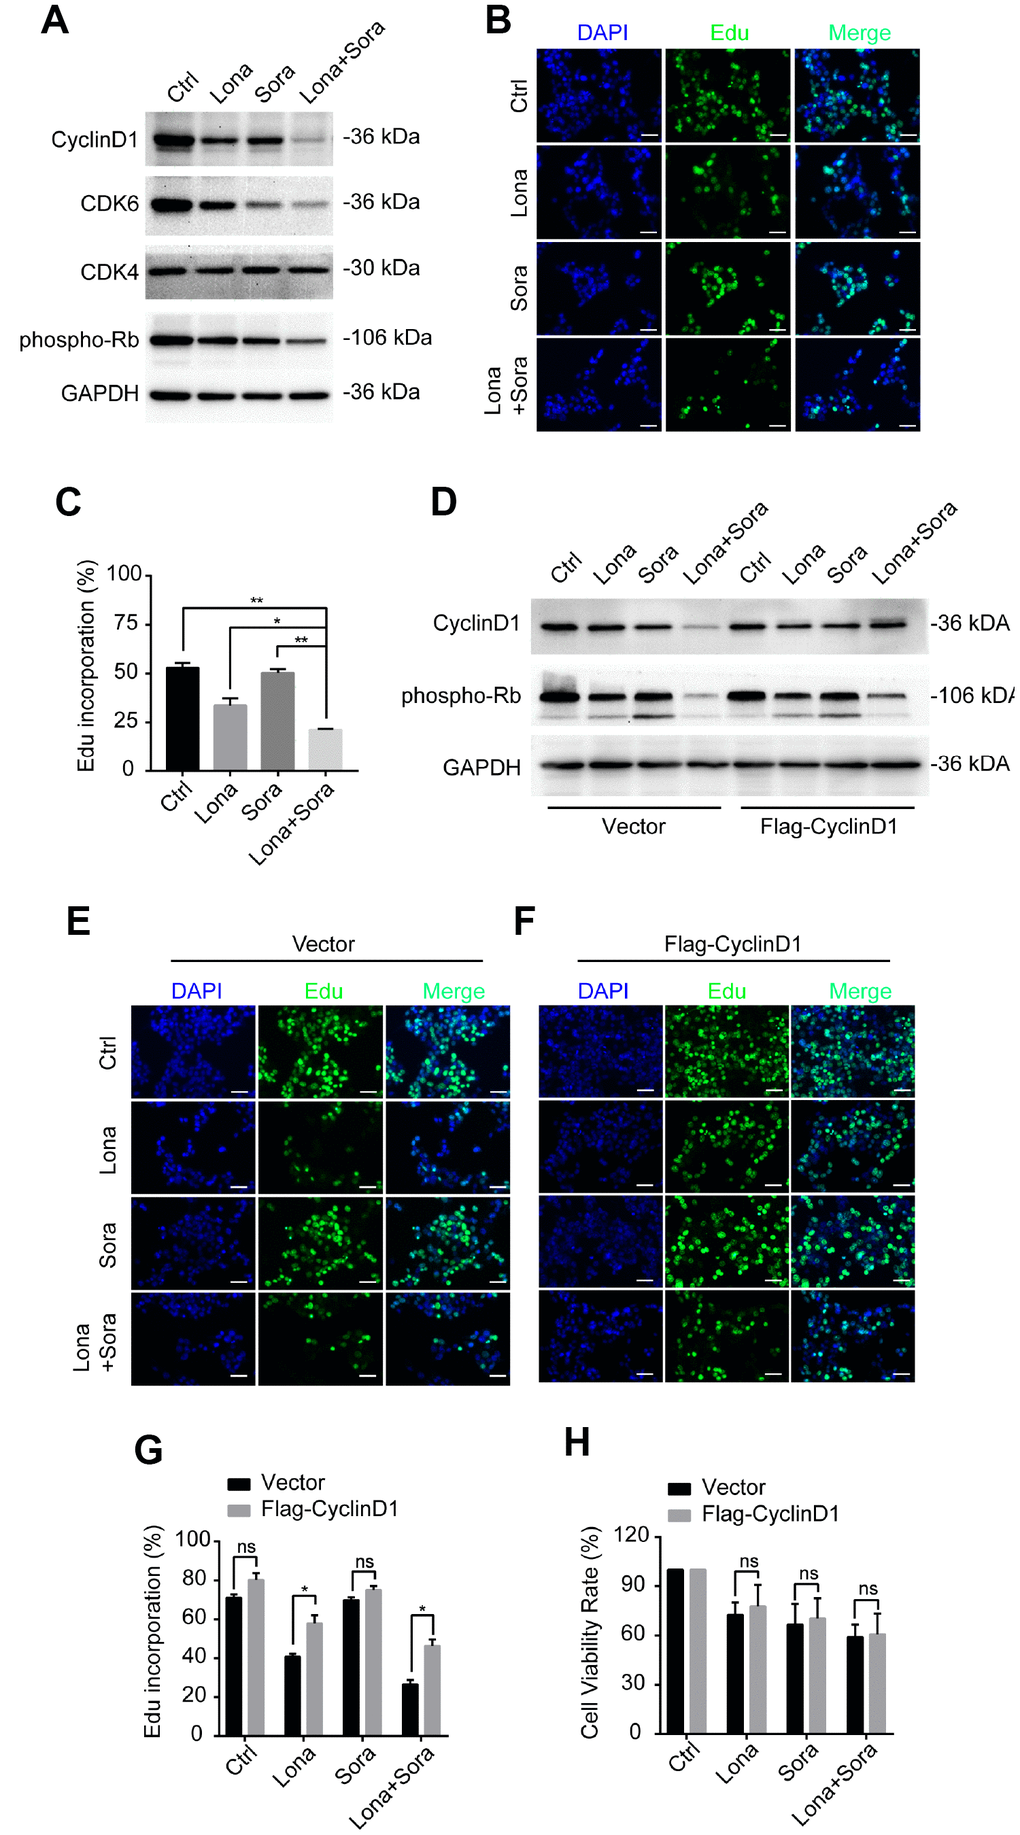 Degradation of cyclin D1 caused by lonafarnib and sorafenib co-treatment inhibits DNA synthesis. (A) HepG2 cells were treated with lonafarnib and/or sorafenib for 48 h. Protein expression levels were determined using the antibodies as indicated. (B) HepG2 cells were treated with lonafarnib and/or sorafenib for 48 h. DNA synthesis was analyzed by Edu staining. (C) Quantification of Edu positive straining in (B) was shown in the diagram.. *P E and F) Representative image of Edu staining in HepG2 cells transfected with vector control or Flag-Cyclin D1. (G) Quantification of Edu positive straining in (E) and (F). ns, P > 0.05; *P H) HepG2 cells were treated with lonafarnib and/or sorafenib for 48 h, and cell viability was evaluated by CCK-8 assay. ns, P > 0.05.